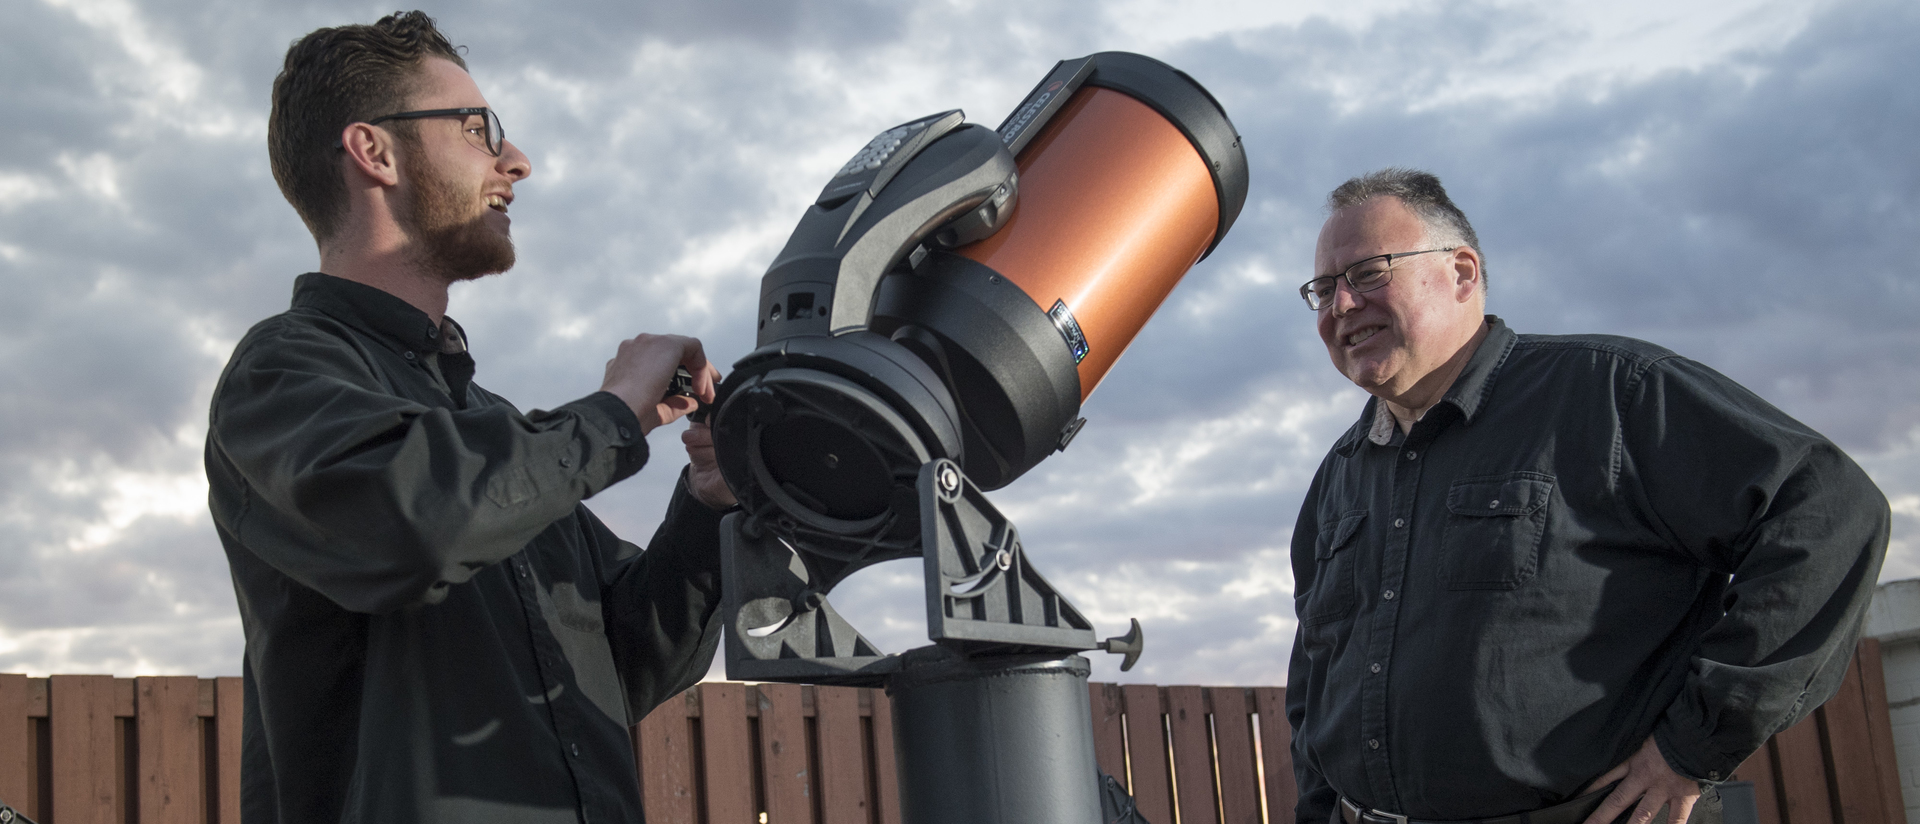 Dr. Paul Thomas (right) will travel to Missouri to experience the Aug. 21 total solar eclipse. UW-Eau Claire will host a viewing event on campus, helping people safely view the partial eclipse.